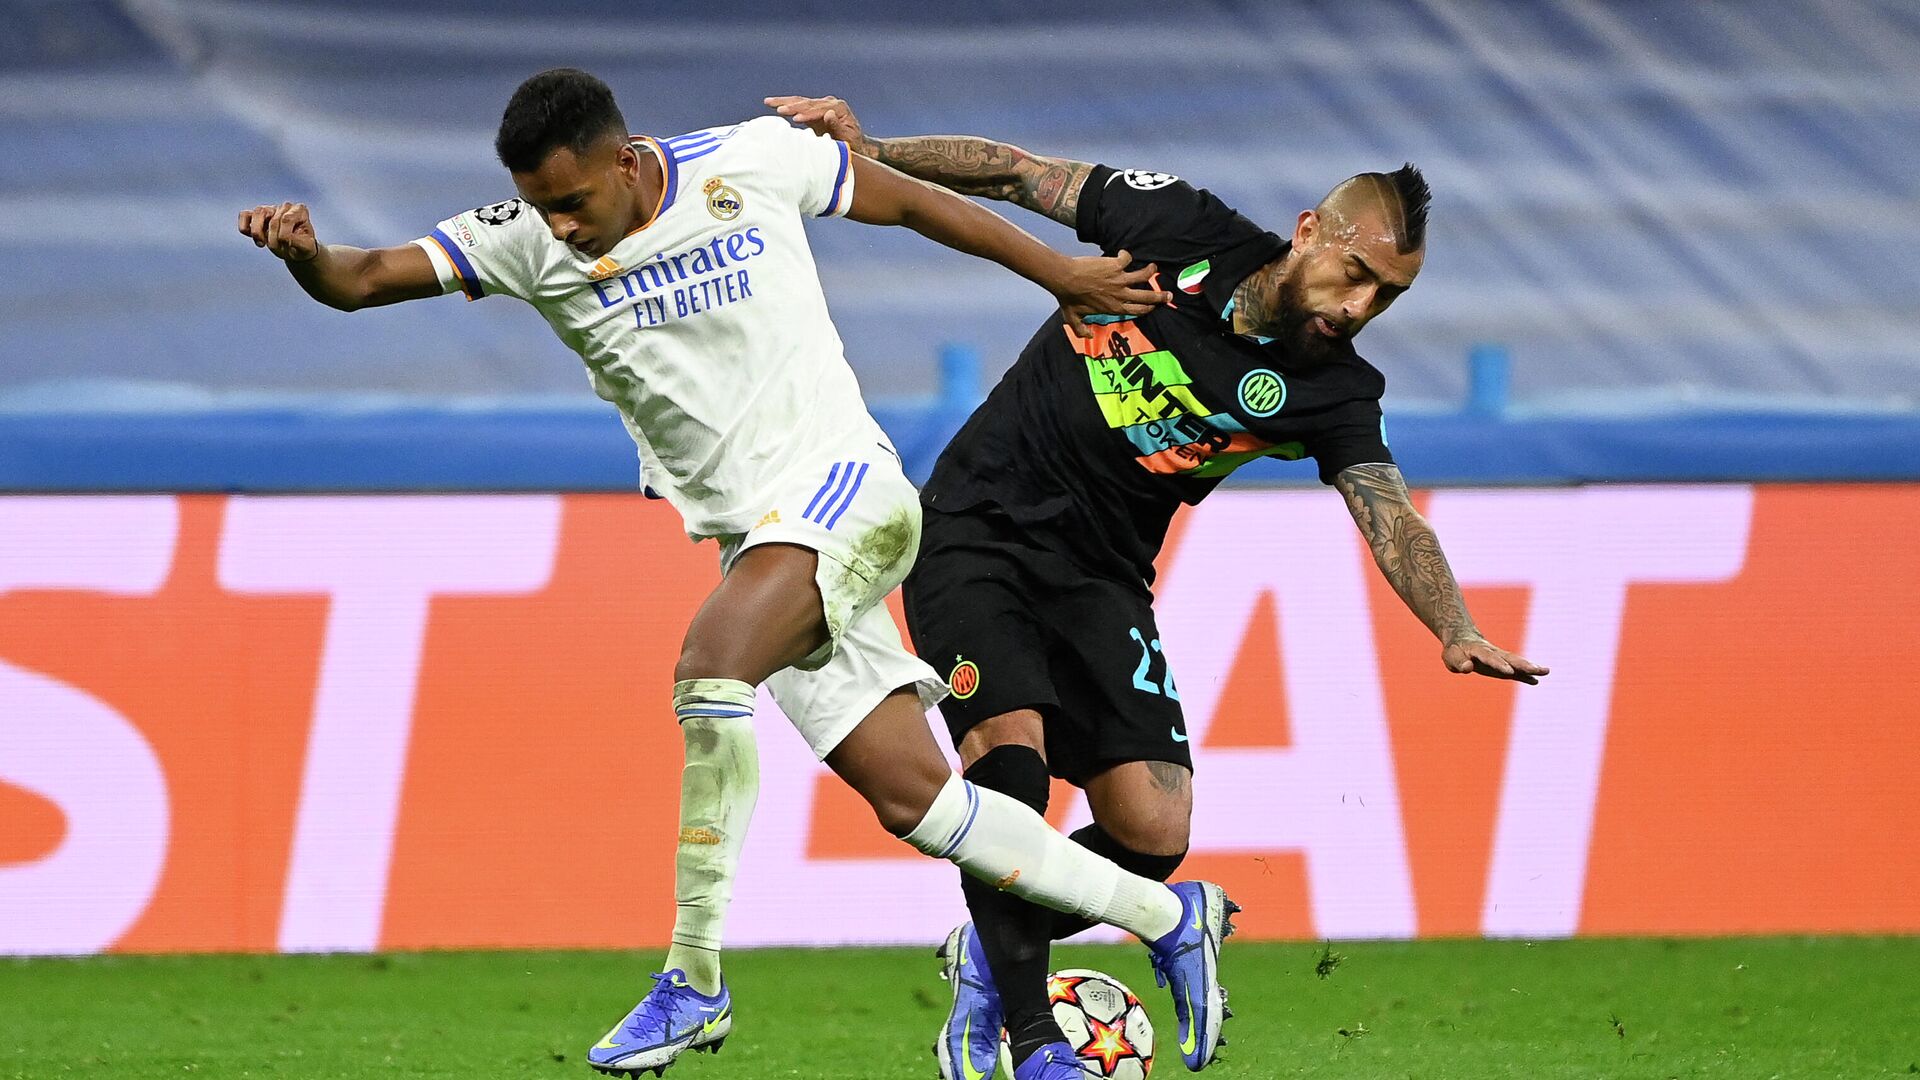 Real Madrid's Brazilian forward Rodrygo (L) fights for the ball with Inter Milan's Chilean midfielder Arturo Vidal during the UEFA Champions League first round group D football match between Real Madrid and Inter Milan at the Santiago Bernabeu stadium in Madrid on December 7, 2021. (Photo by PIERRE-PHILIPPE MARCOU / AFP) - РИА Новости, 1920, 08.12.2021